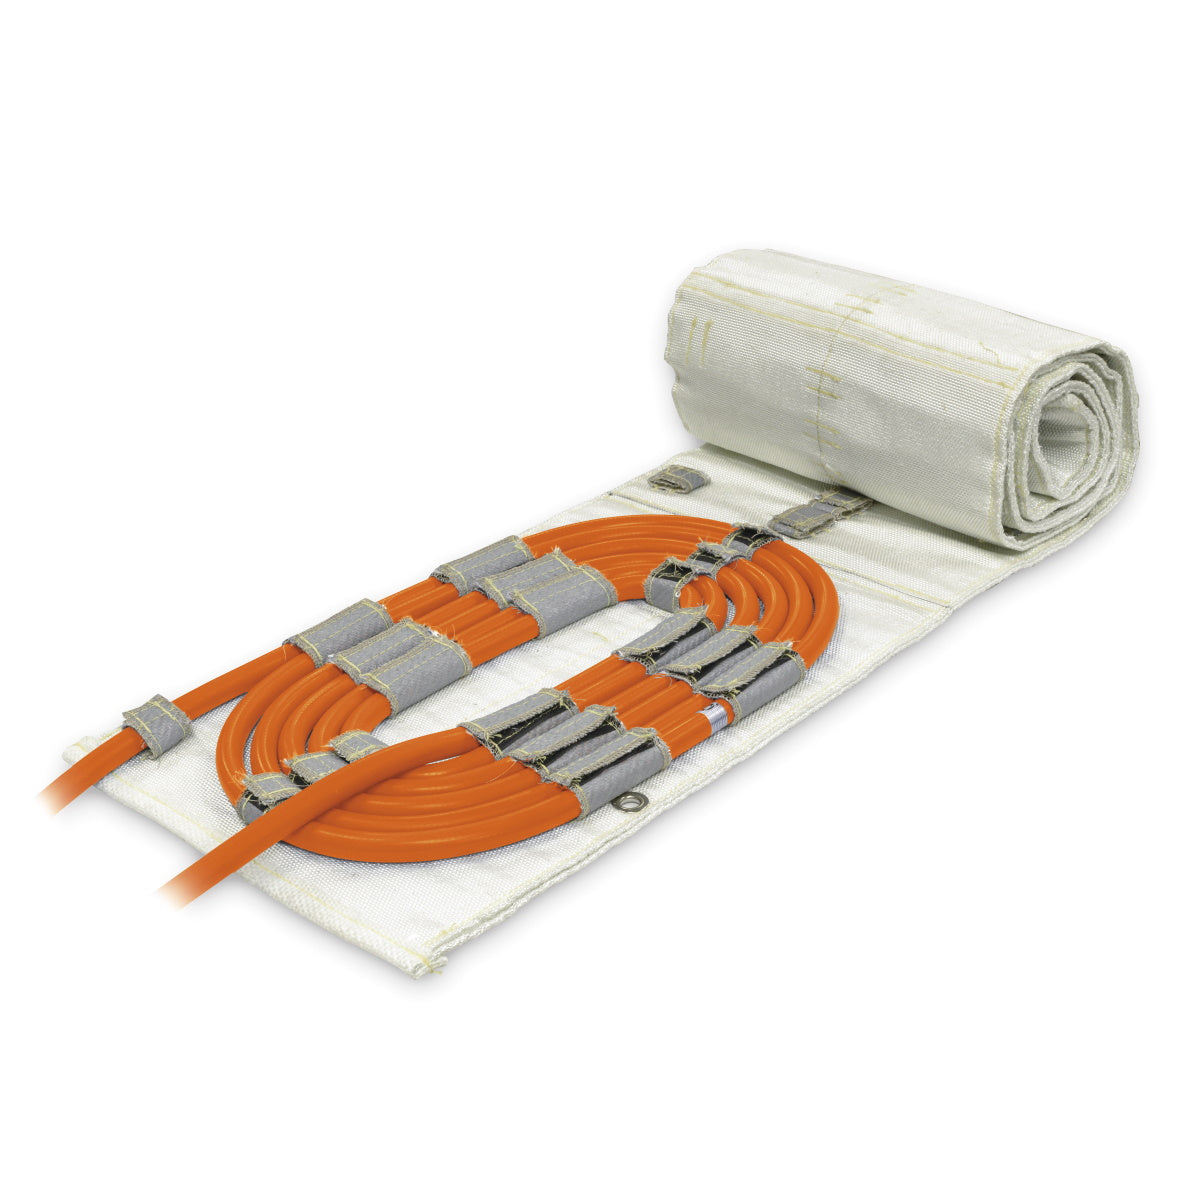 Miller ArcReach Heater Preheat Insulation with Cable Harness (301334)